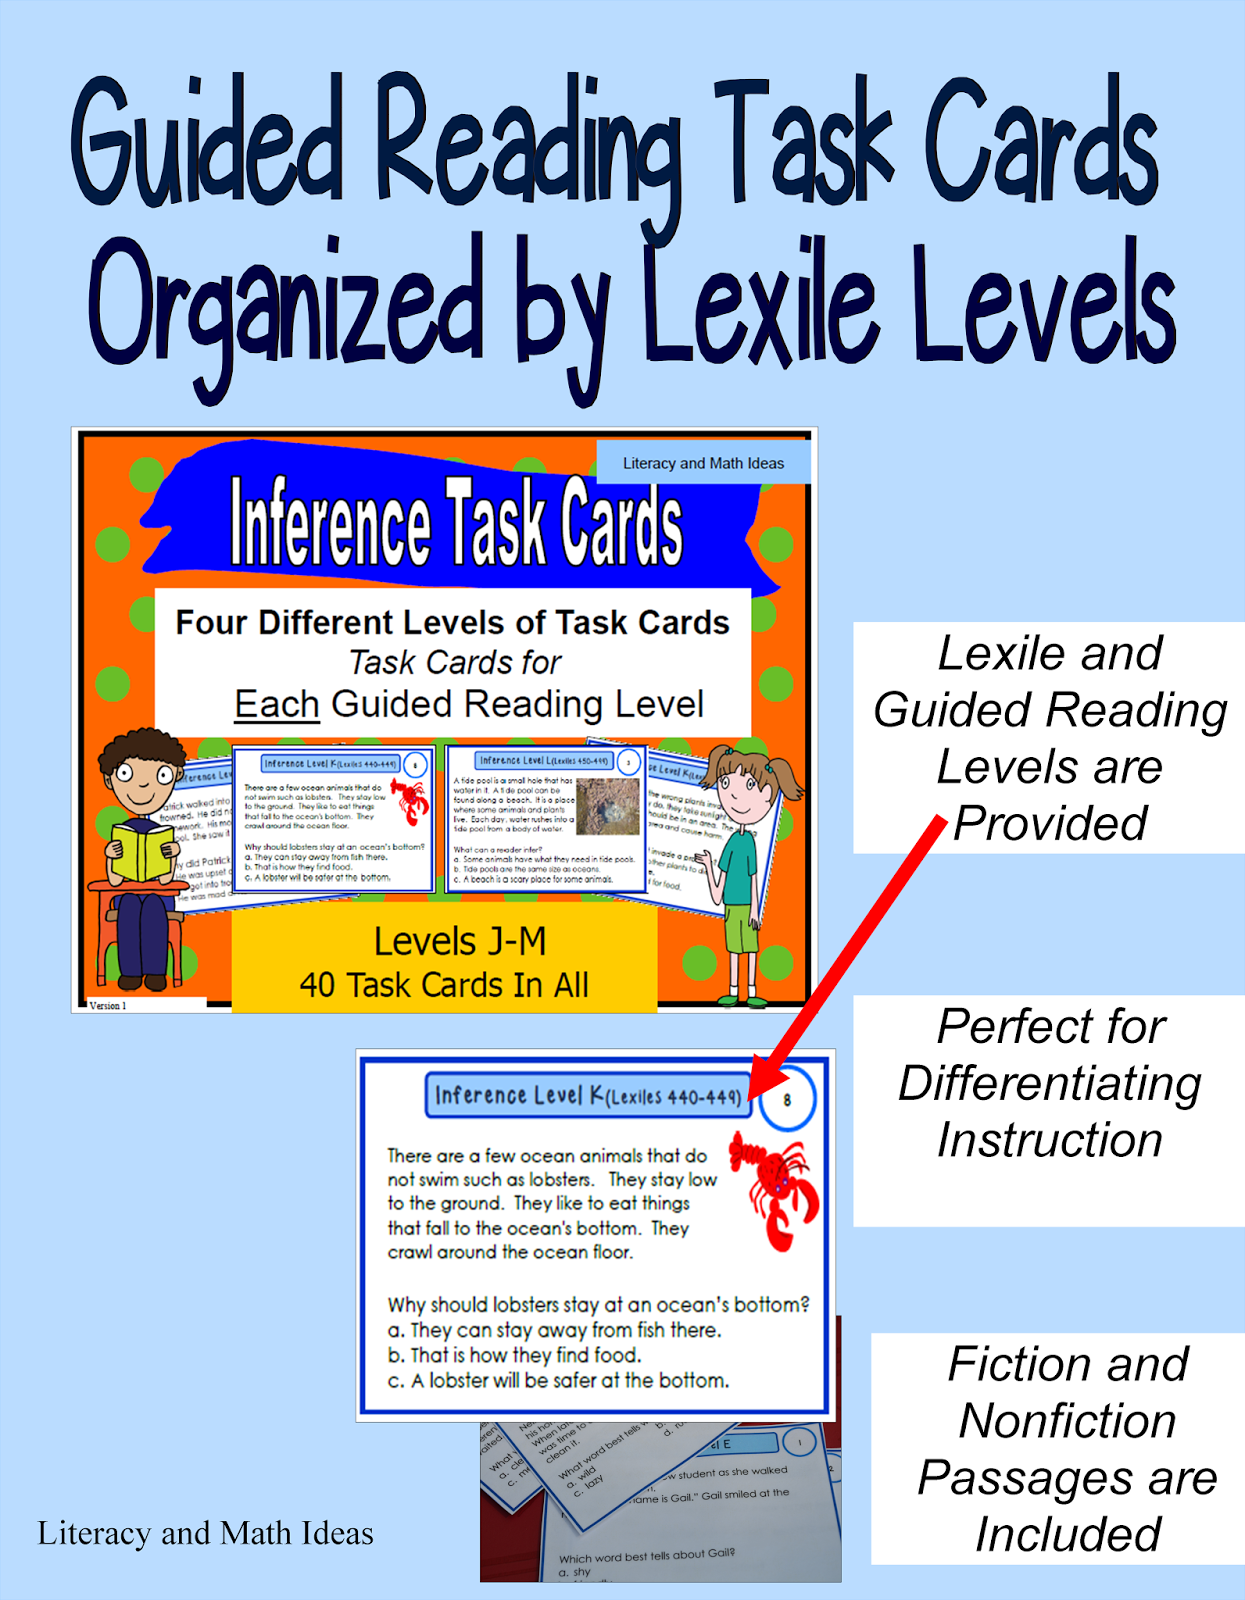 lexile level compared to guided reading level